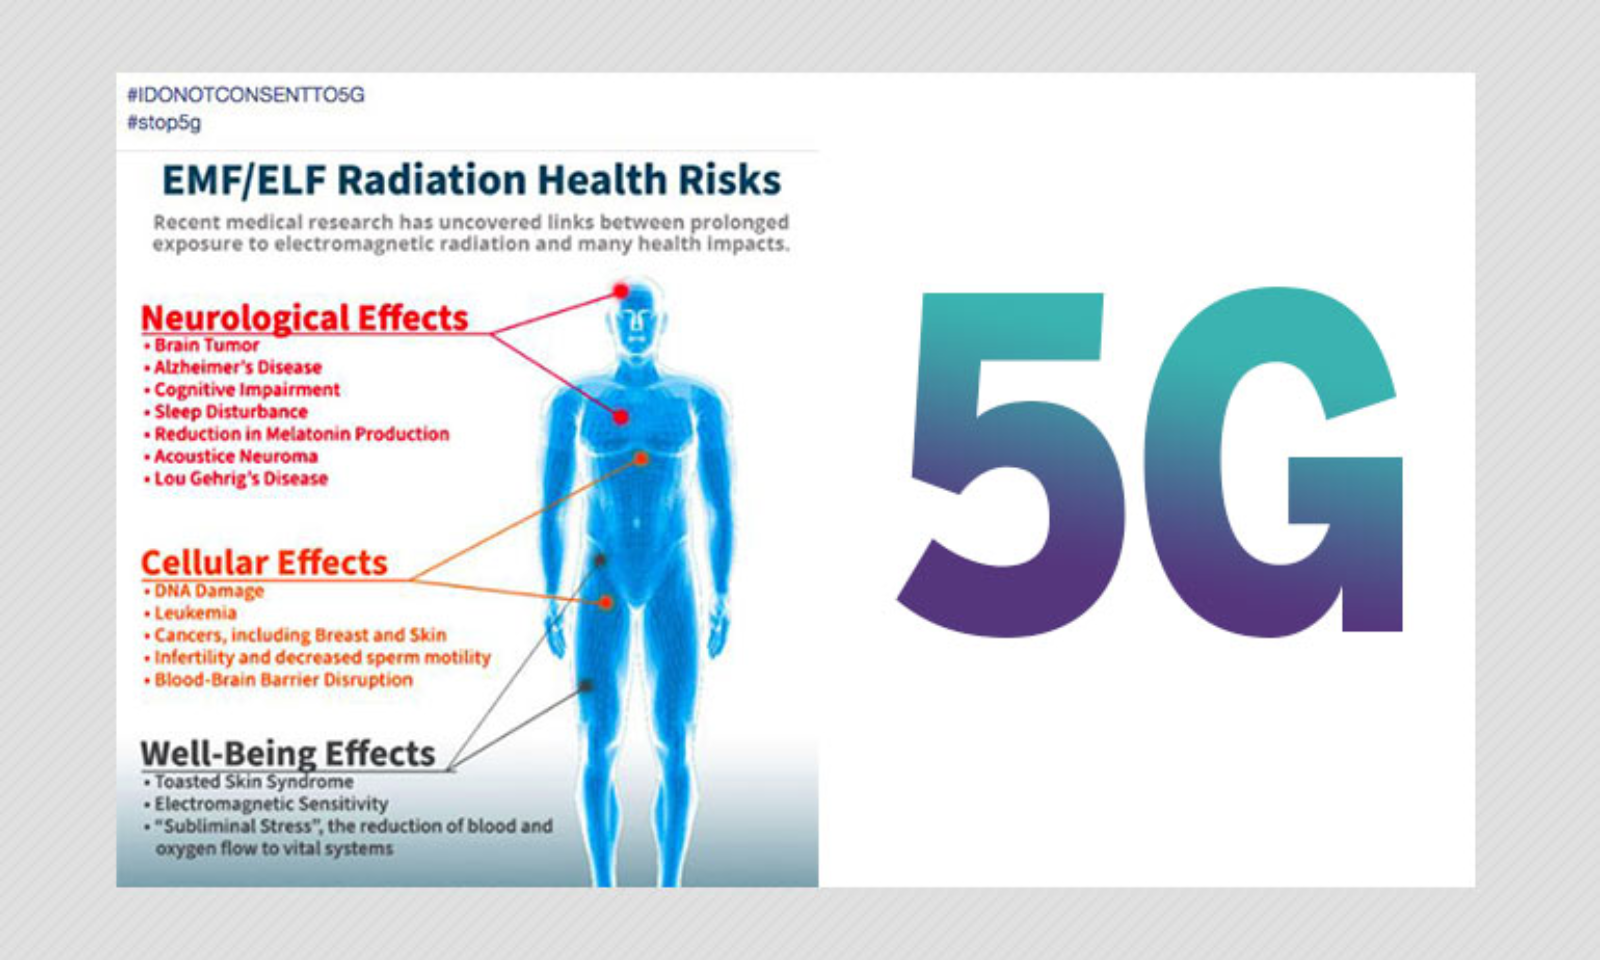 Does 5G Radiation Cause COVID-19 And Other Diseases? A Fact Check